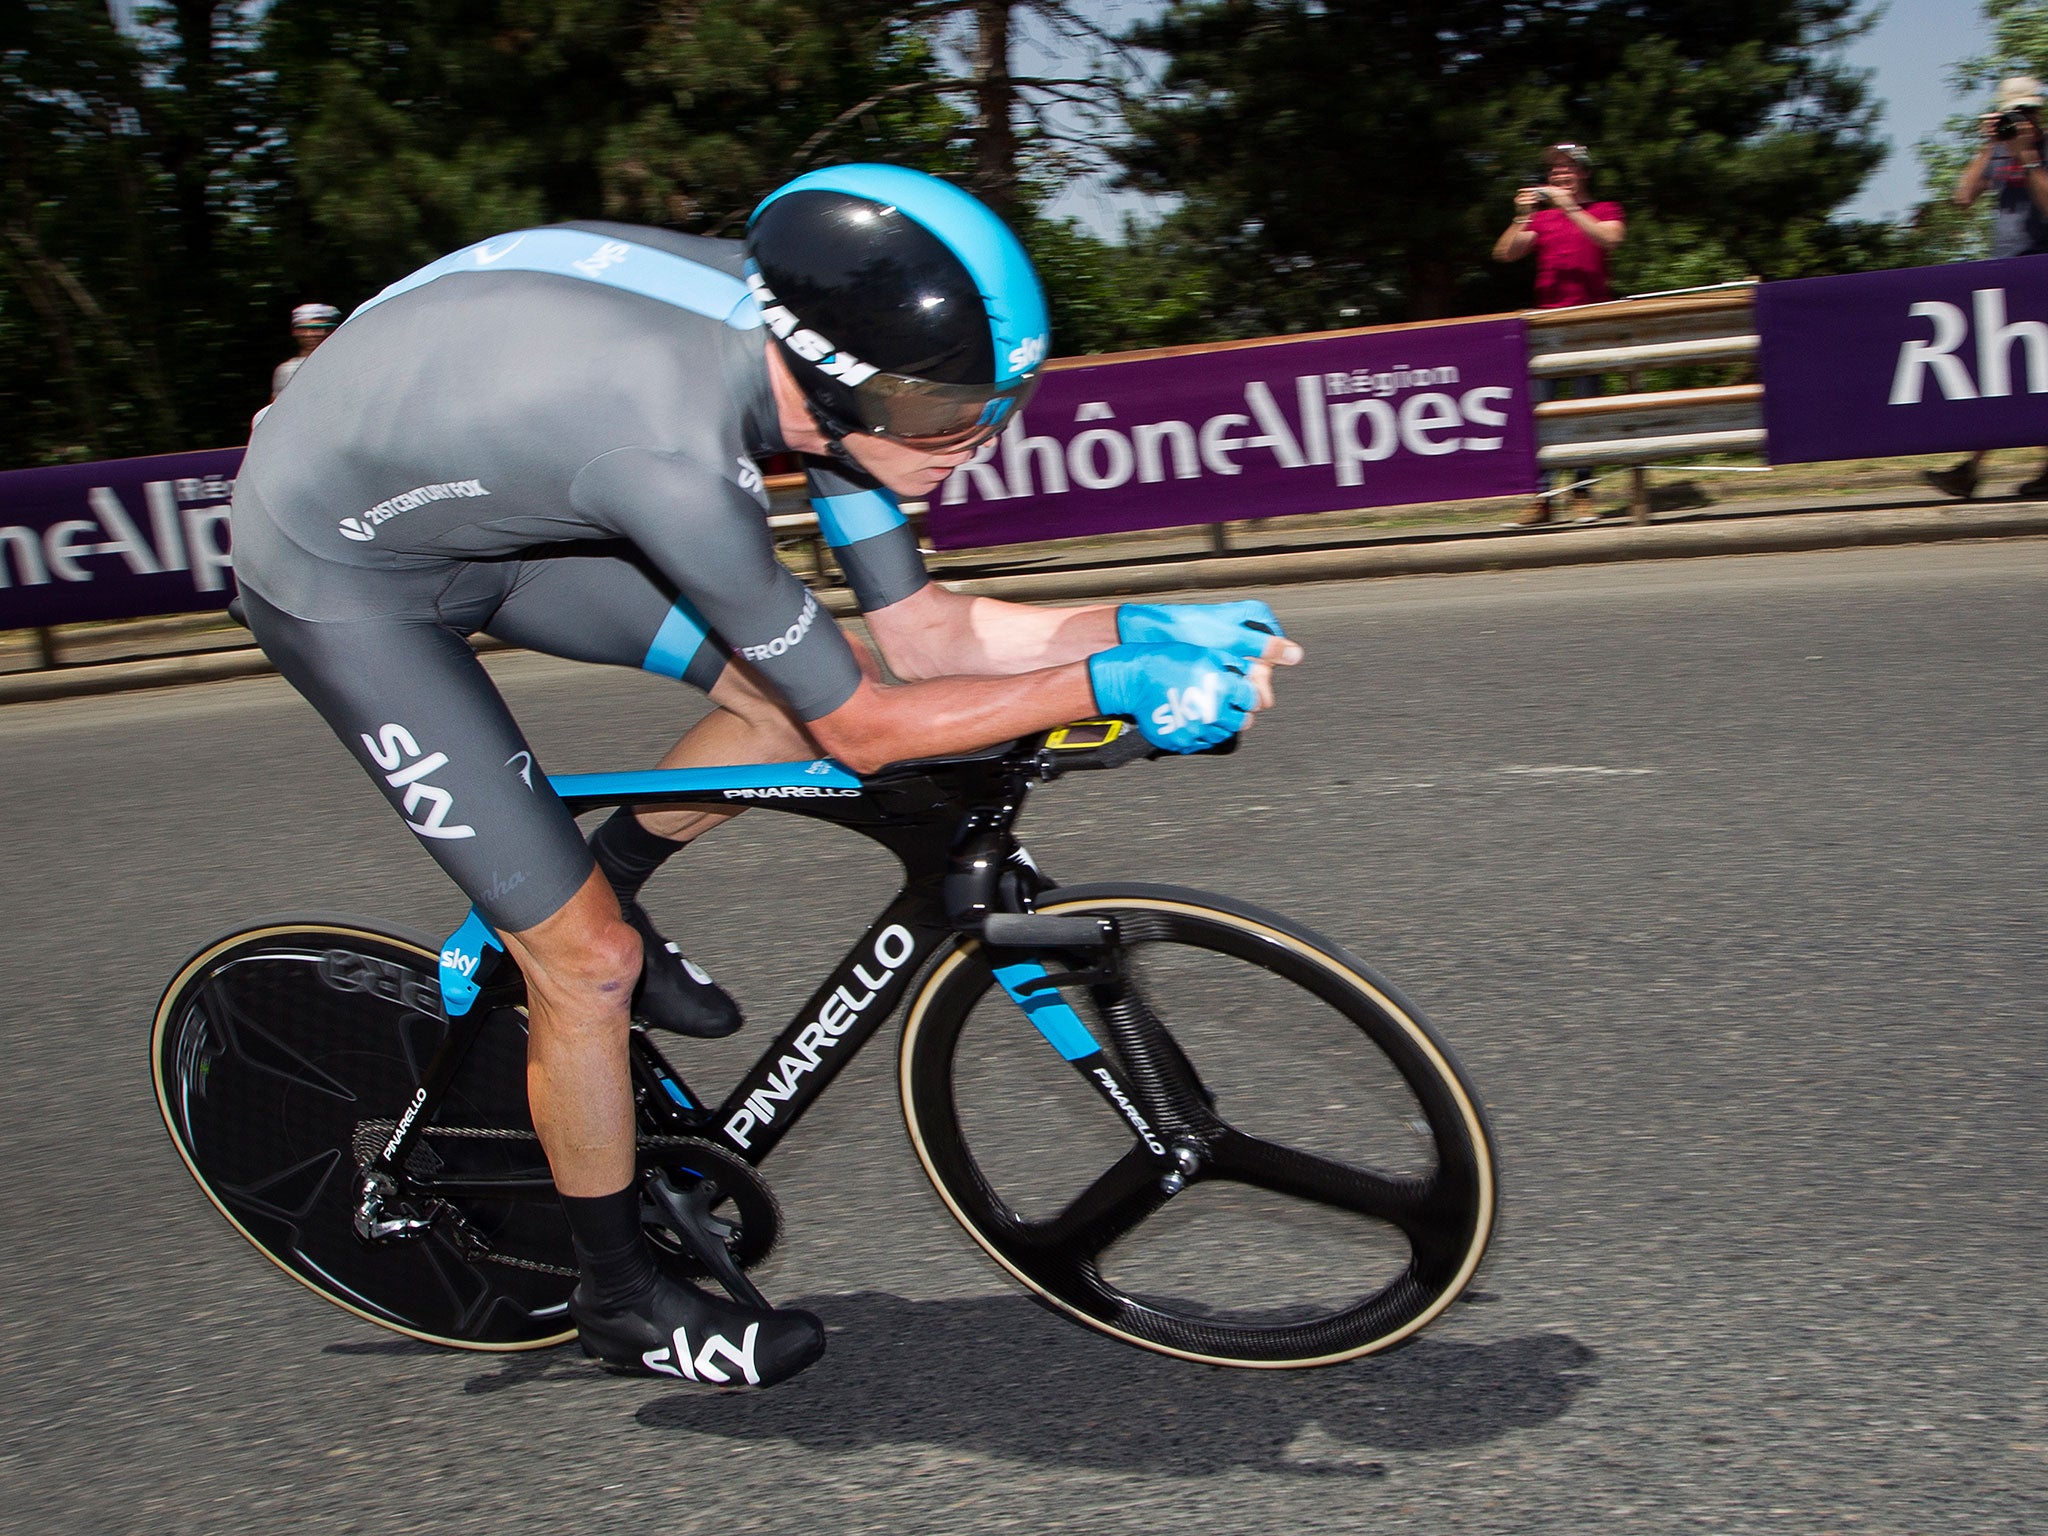 Chris Froome on his way to victory during yesterday’s time trial